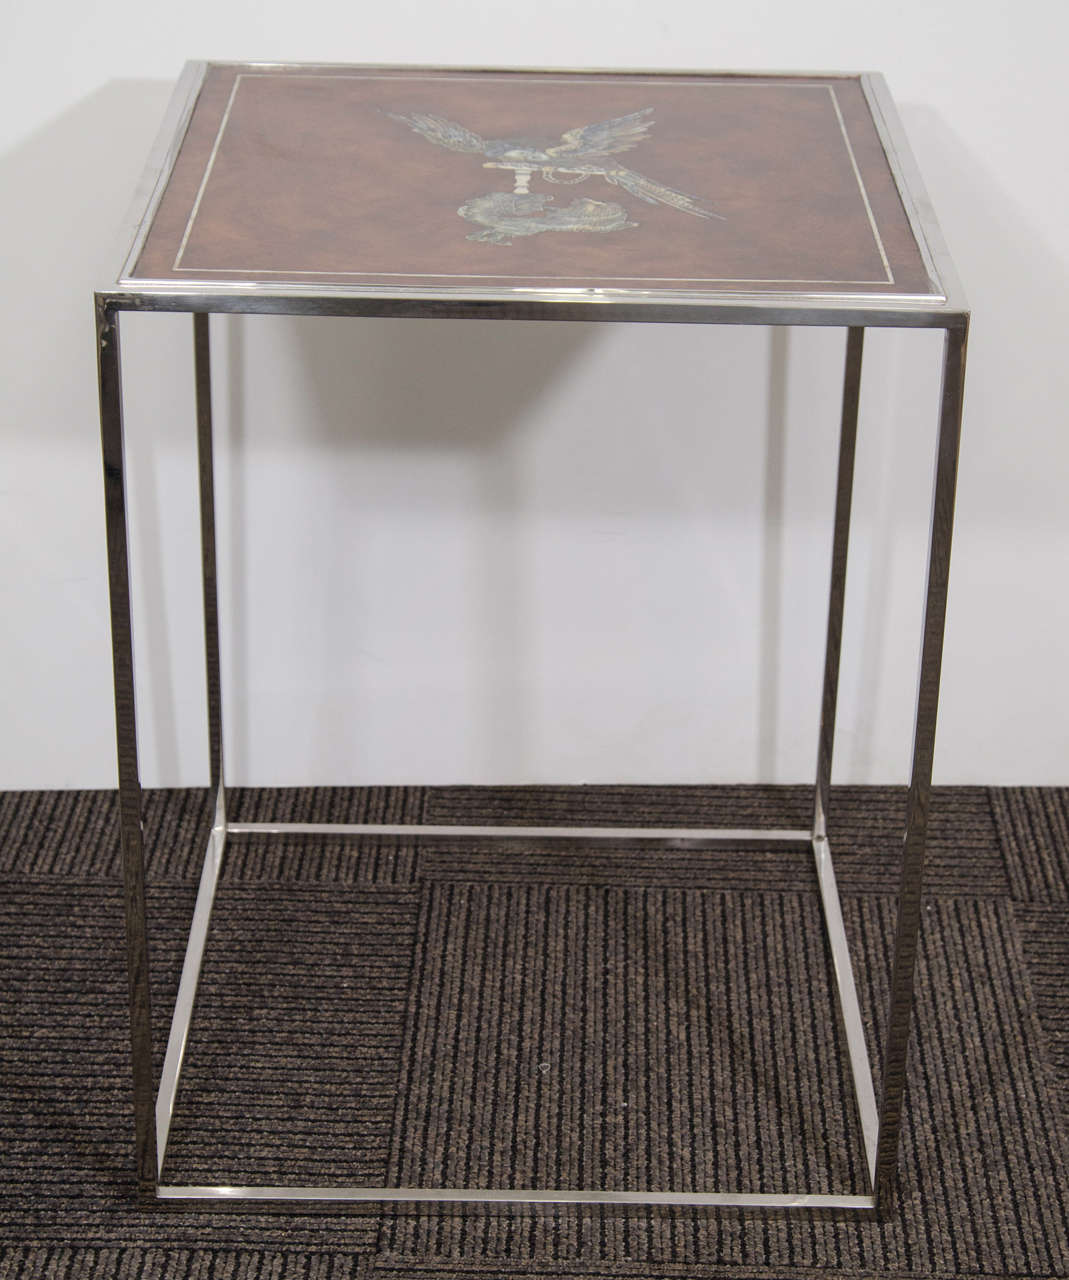 A vintage burl wood and stainless steel side table with mother of pearl inlay, depicting an parrot and dog. Very good condition, consistent with age and use.